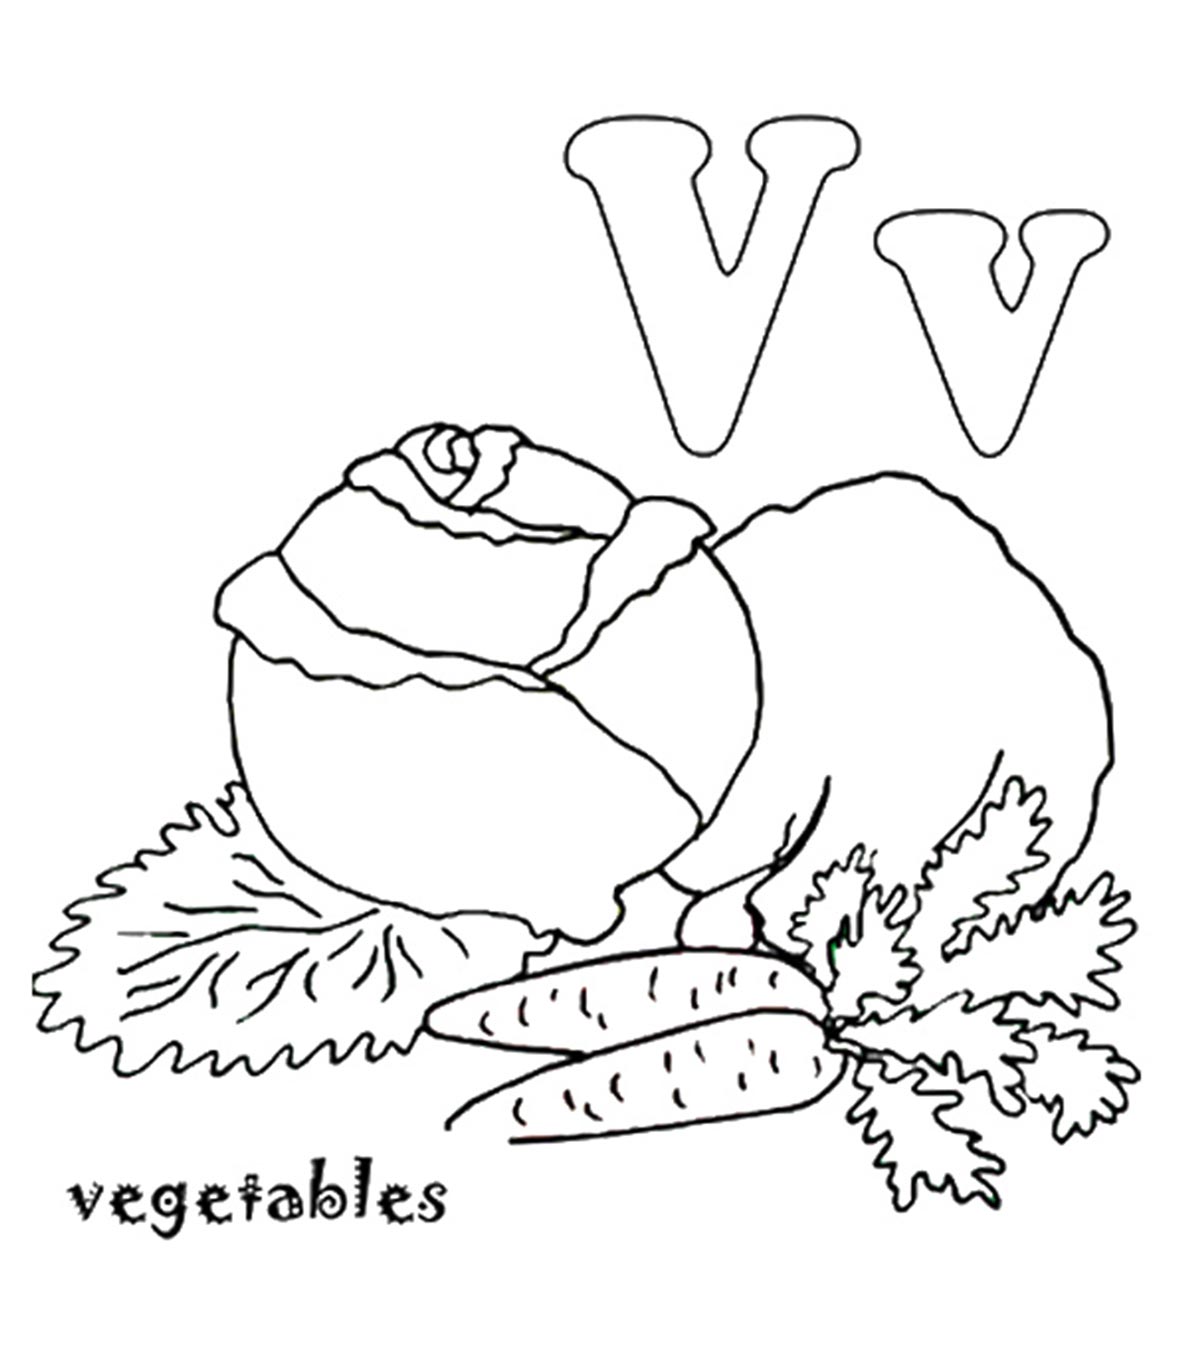 Top 10 Letter ‘V’ Coloring Pages Your Toddler Will Love To Learn & Color_image